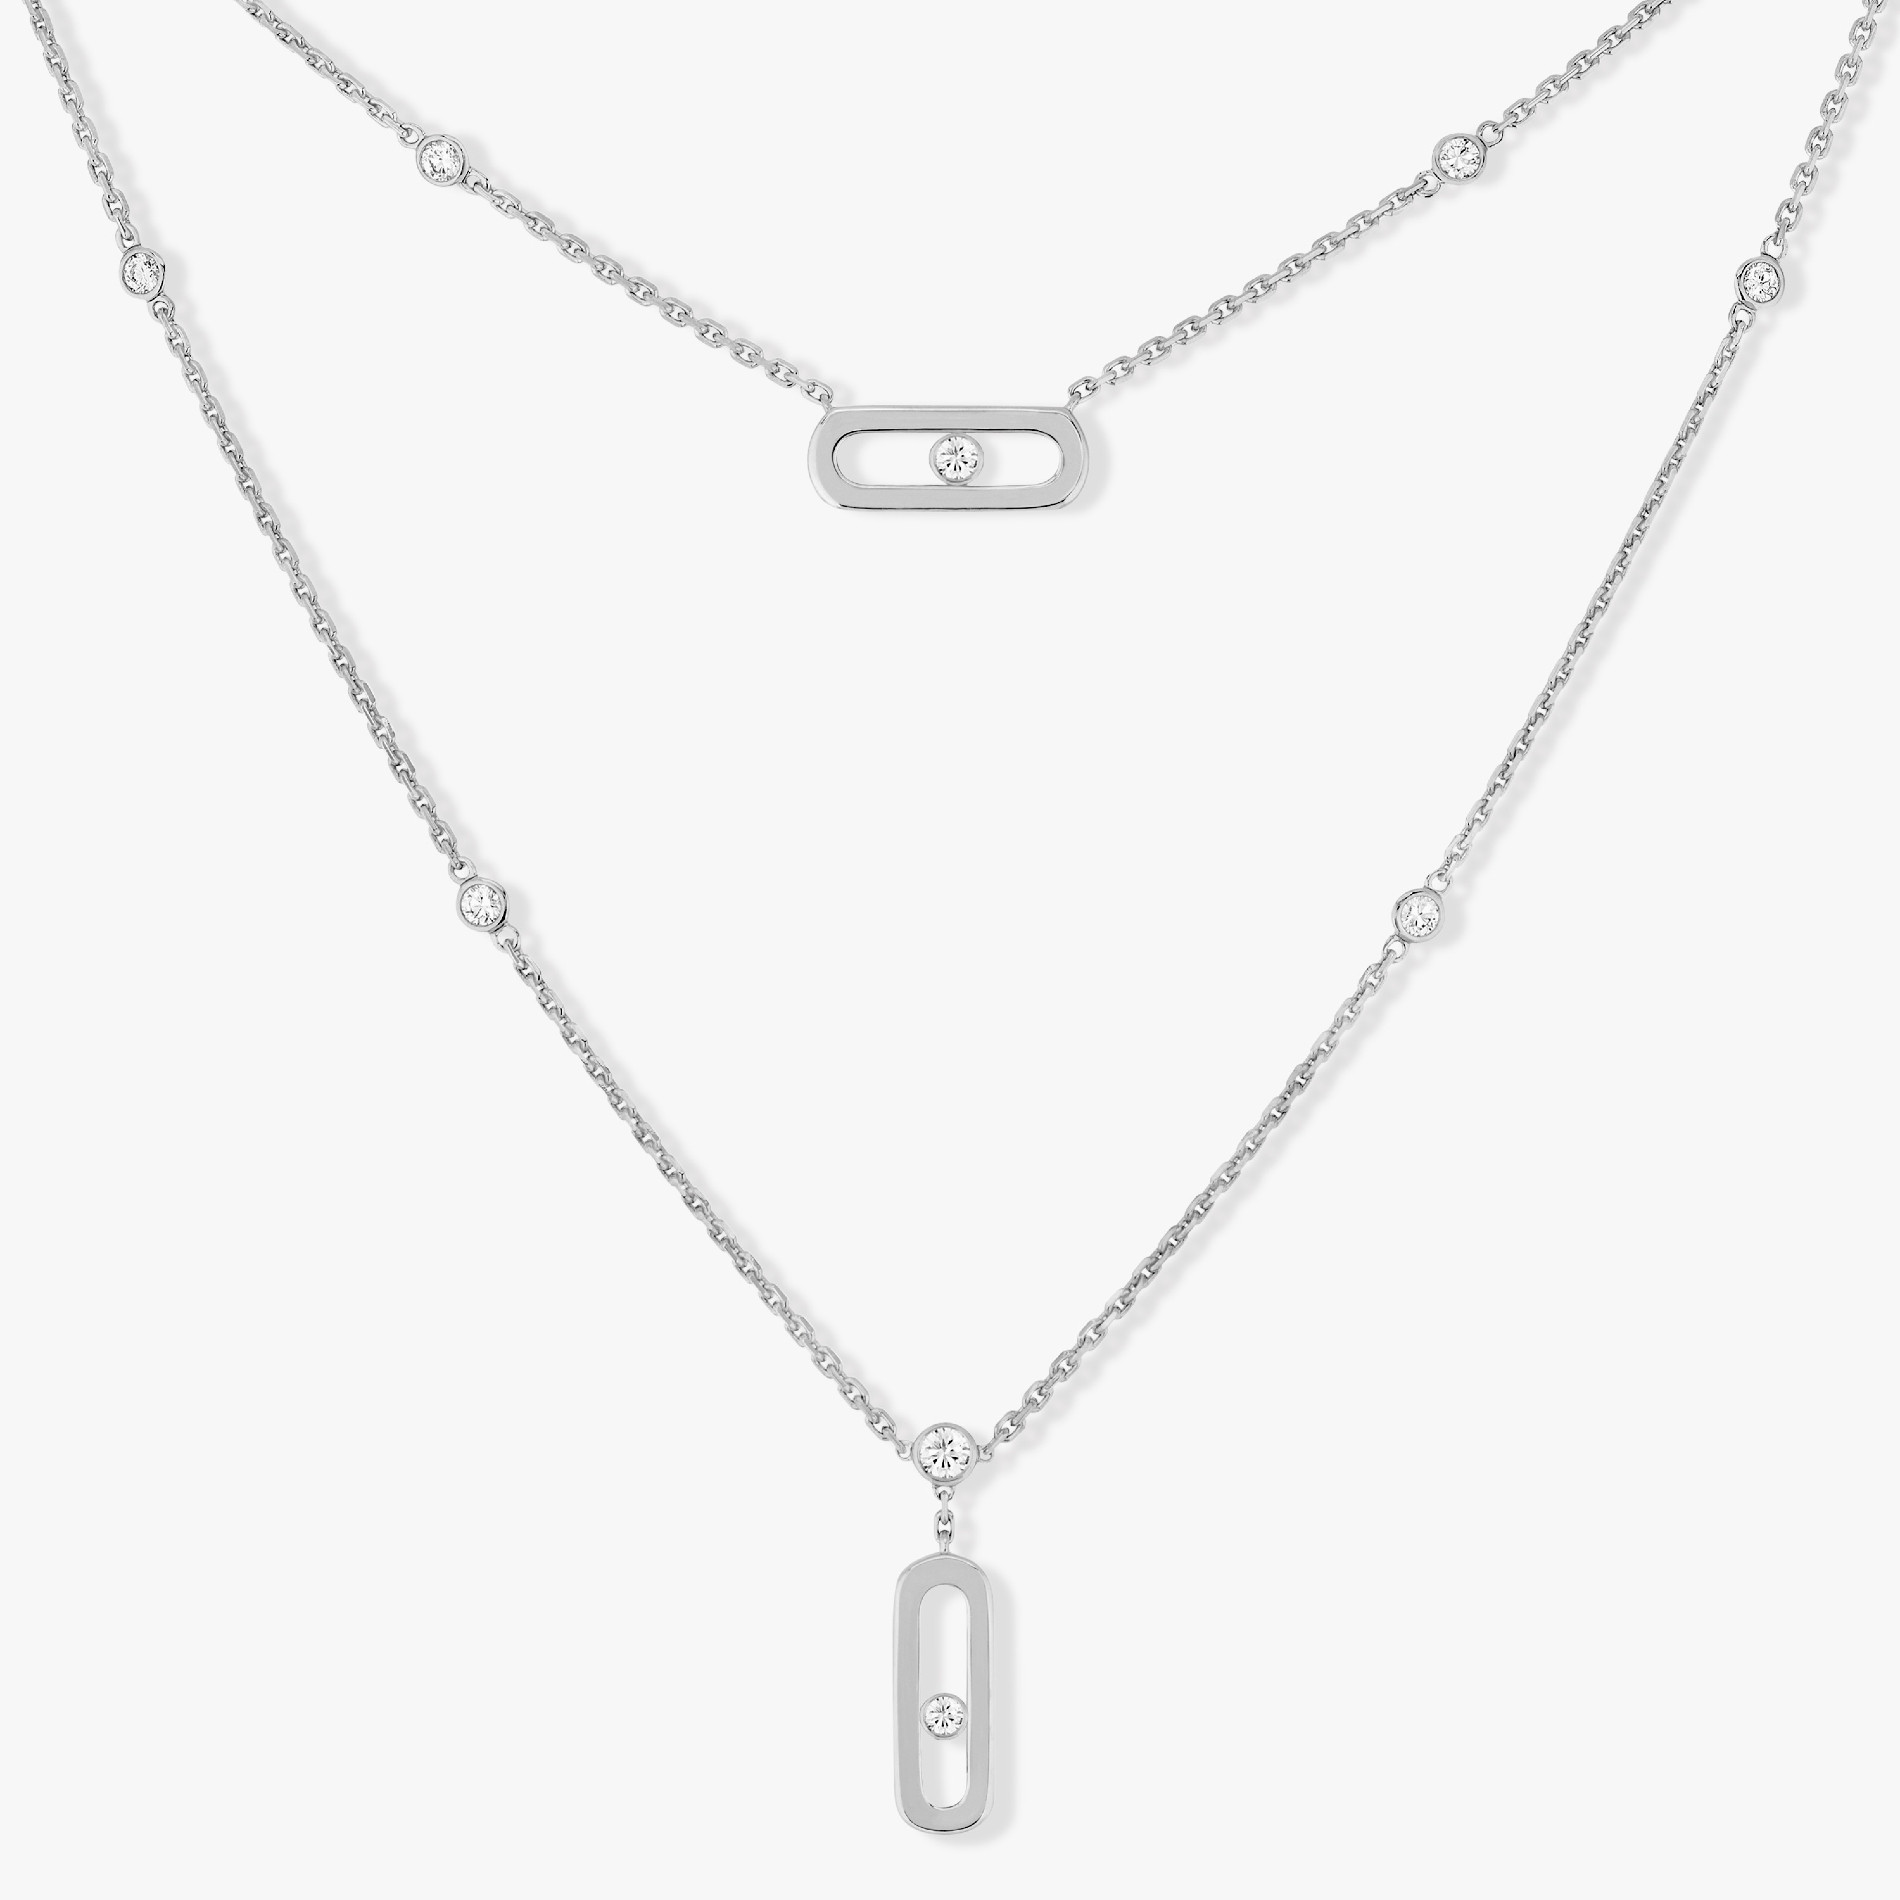 Move Uno 2-row necklace by Messika